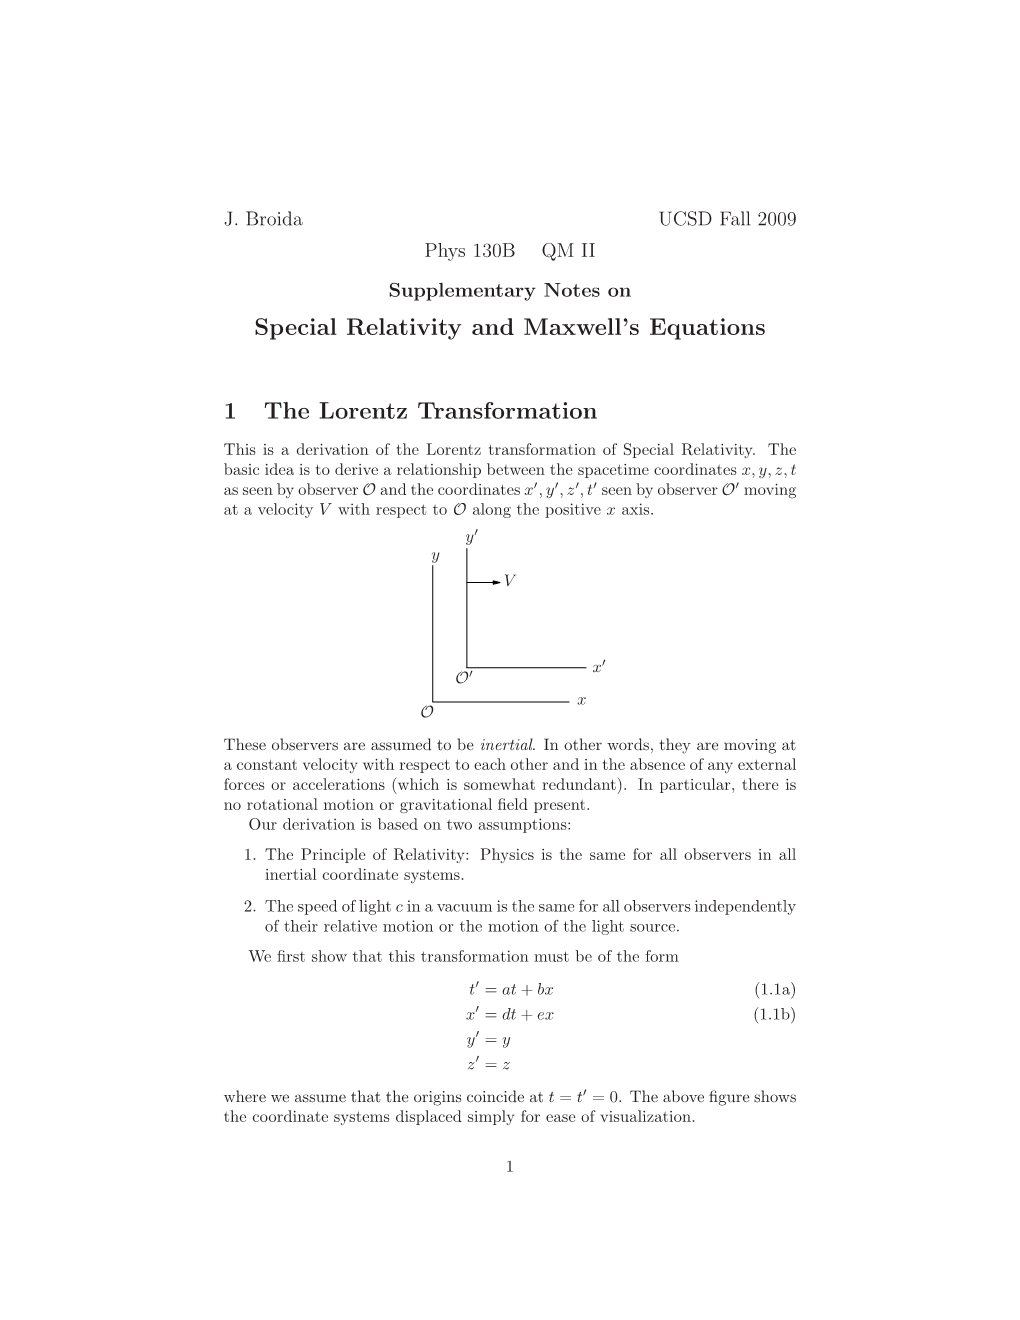 Special Relativity and Maxwell's Equations 1 the Lorentz Transformation